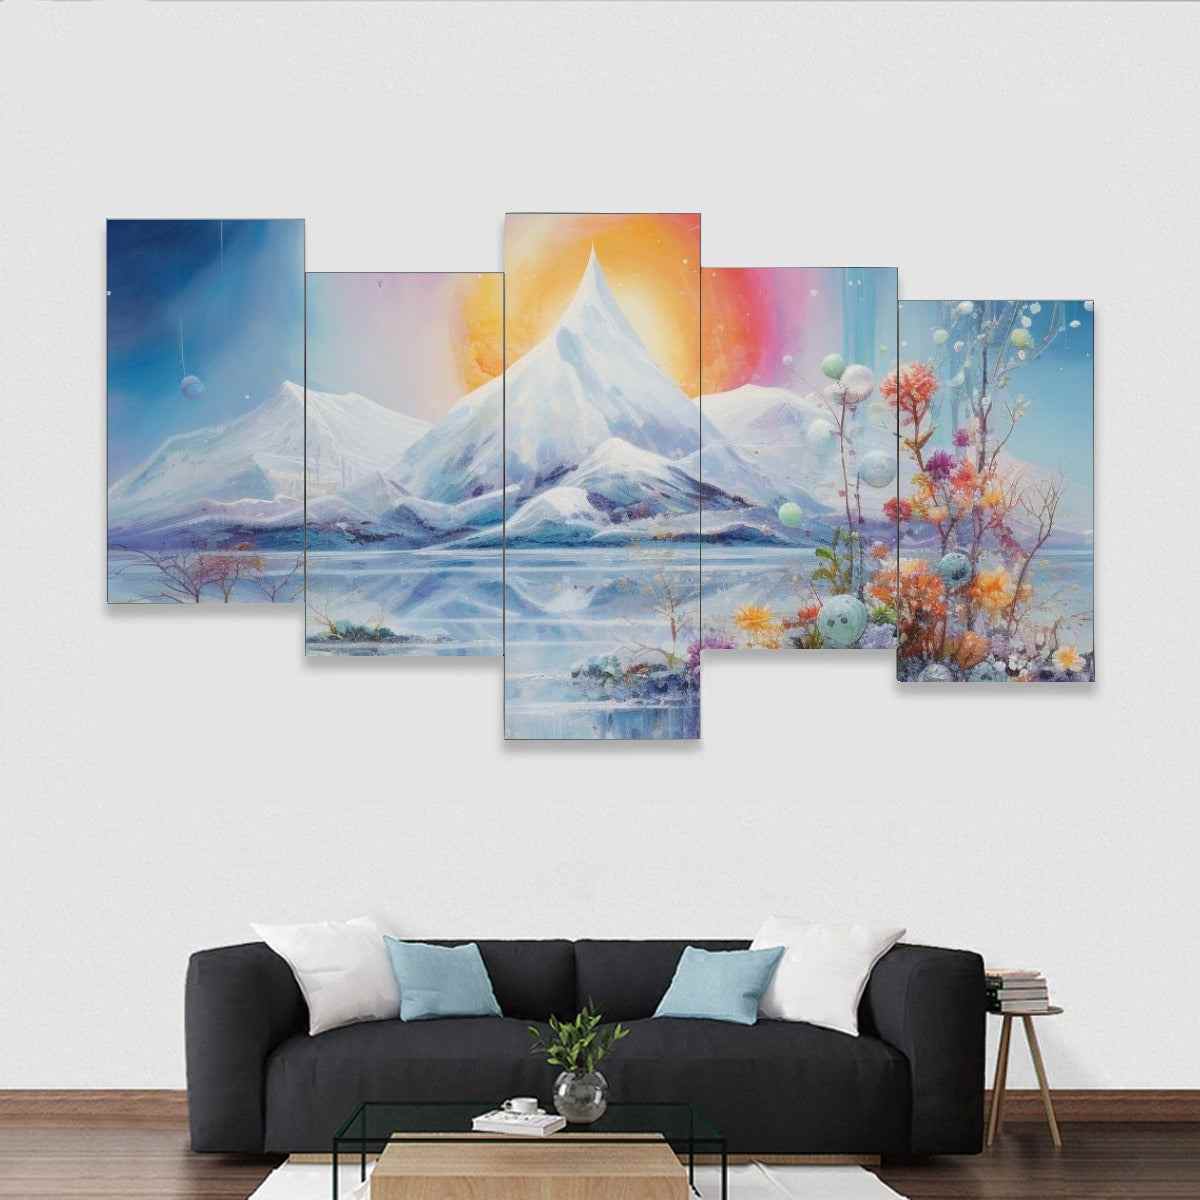 Framed five-piece Mural paintings PODSAVVY LIVING